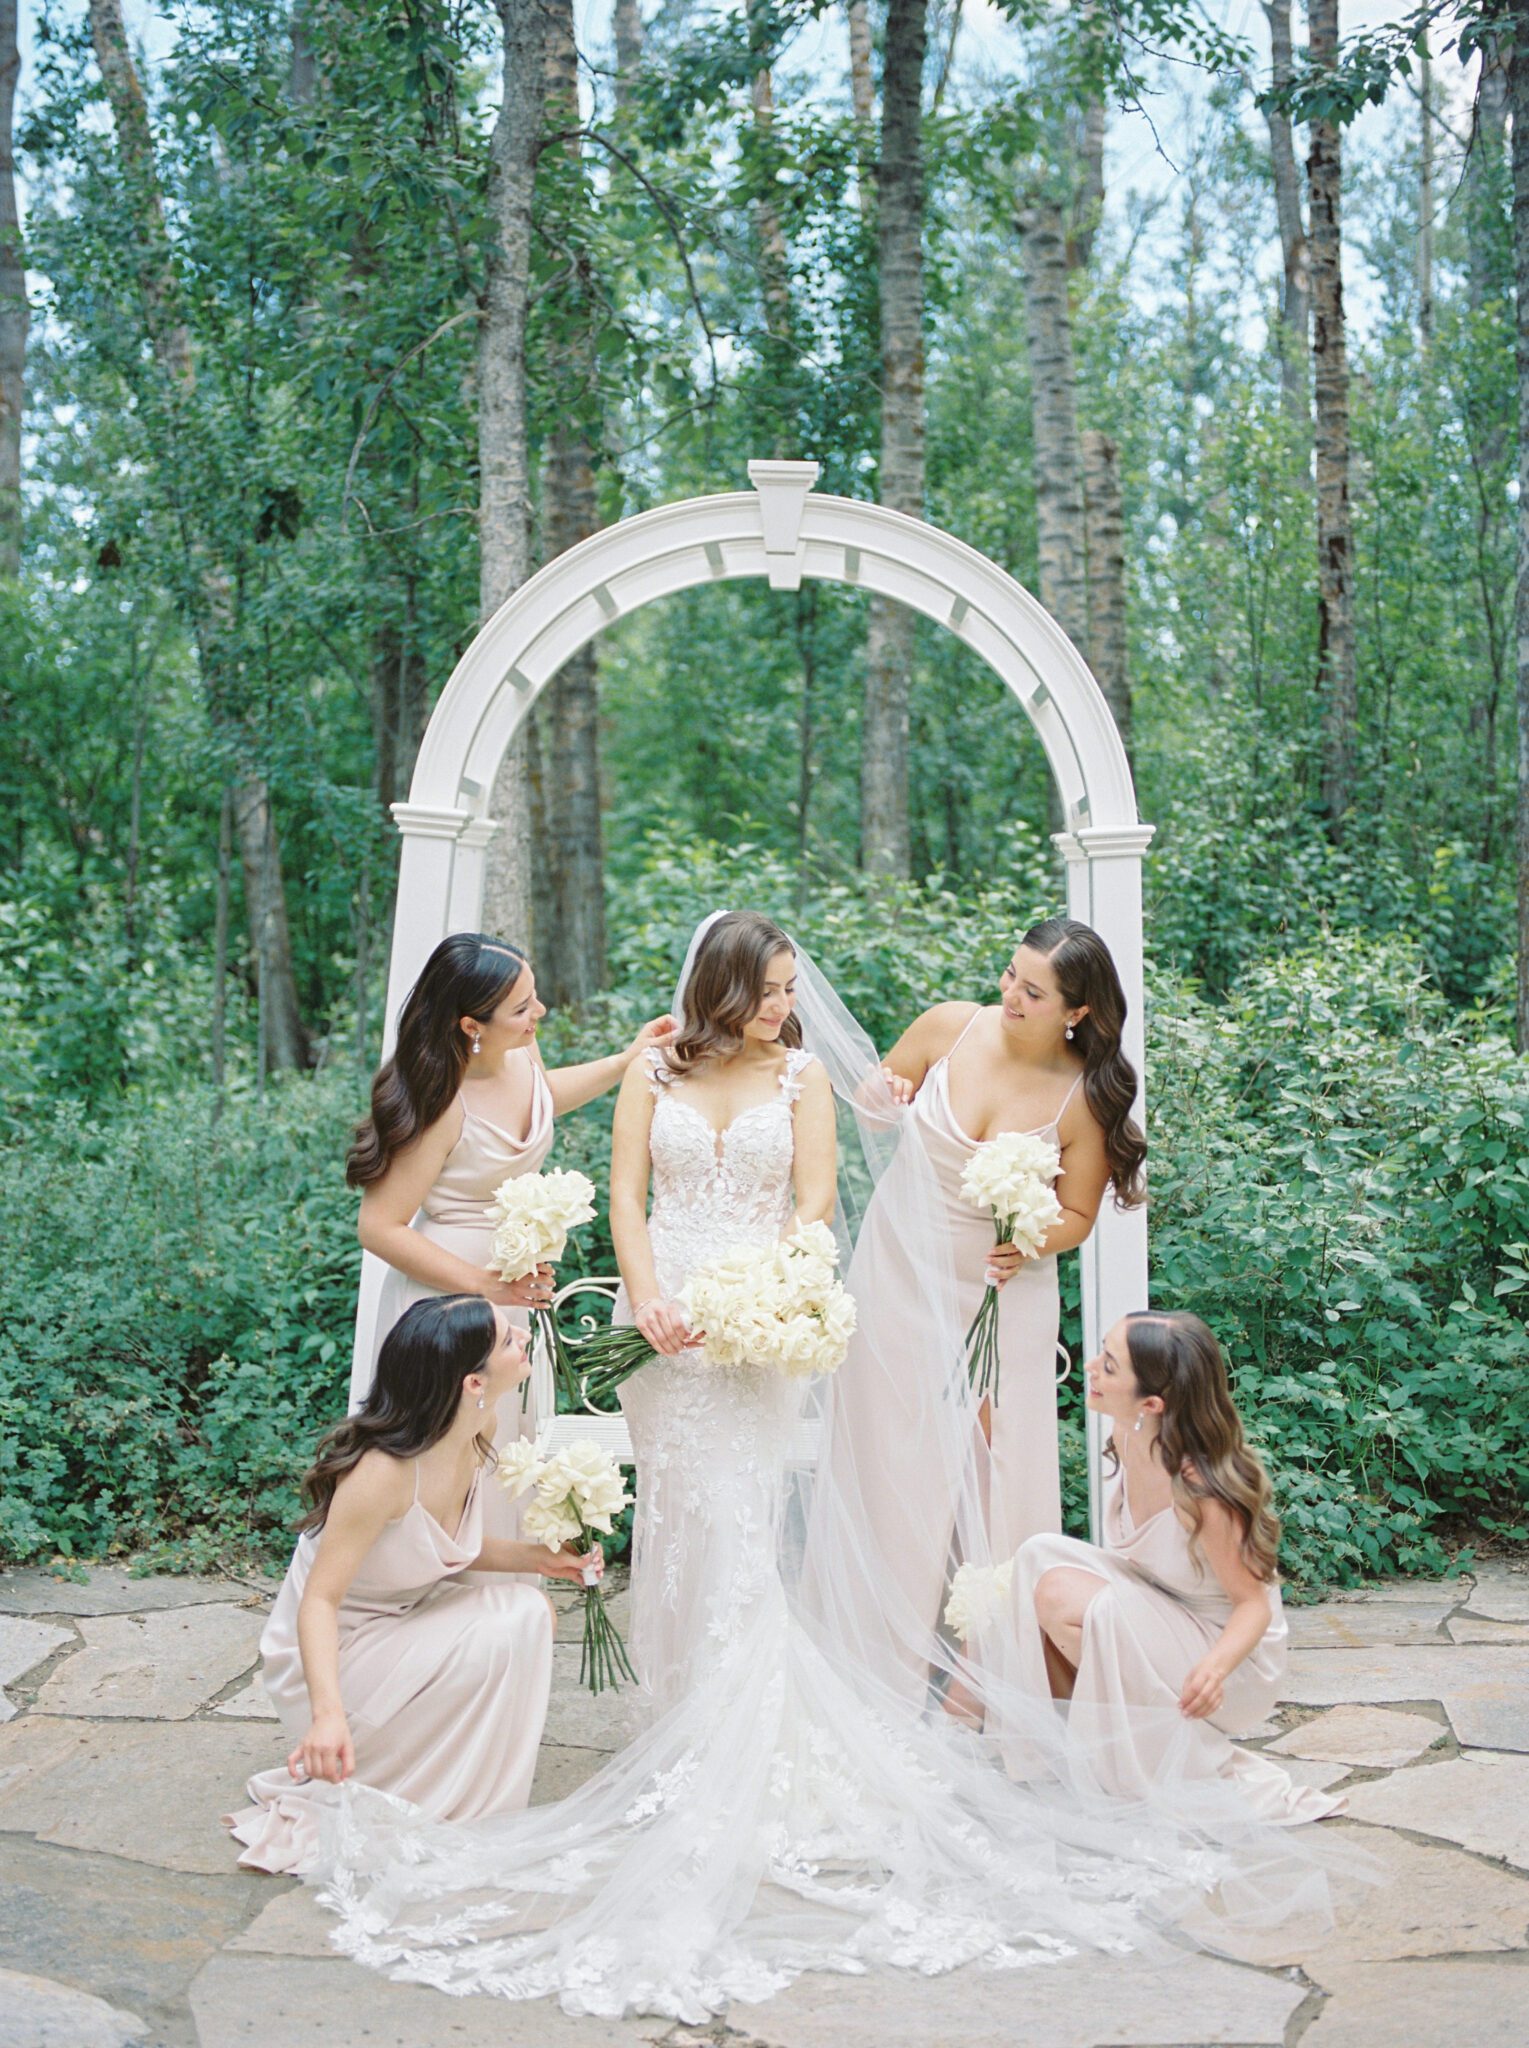 Elegant wedding at Sparrow Lane Events in Alberta. Bride surrounded by bridesmaids. Classic colour palette of white, blush, and green wedding inspiration.